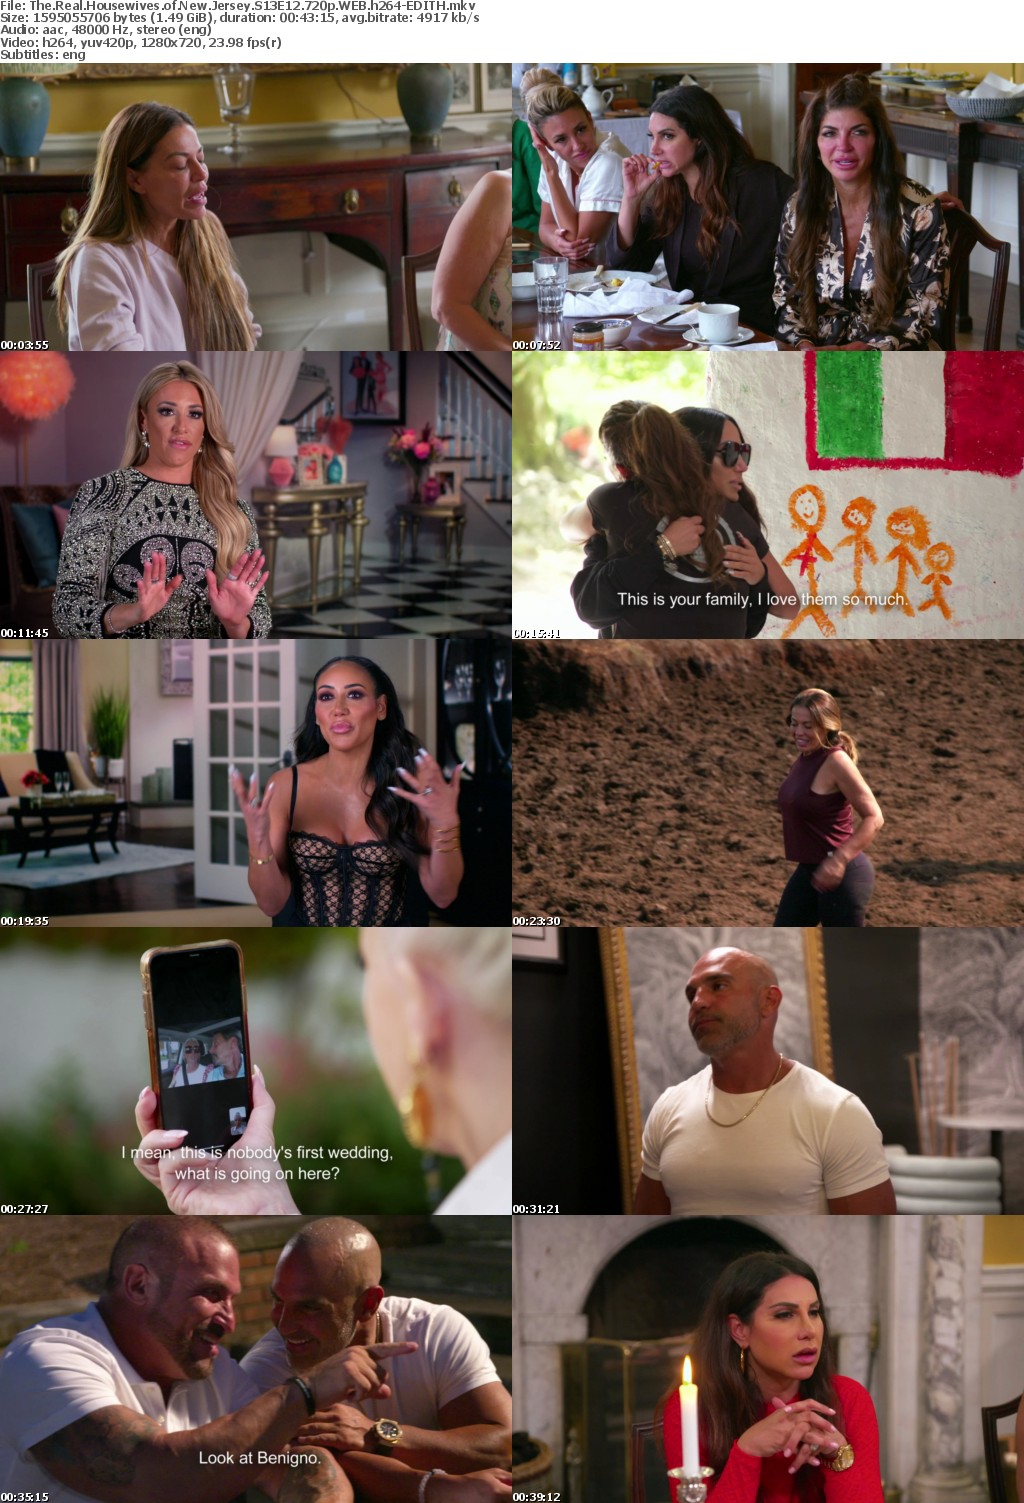 The Real Housewives of New Jersey S13E12 720p WEB h264-EDITH